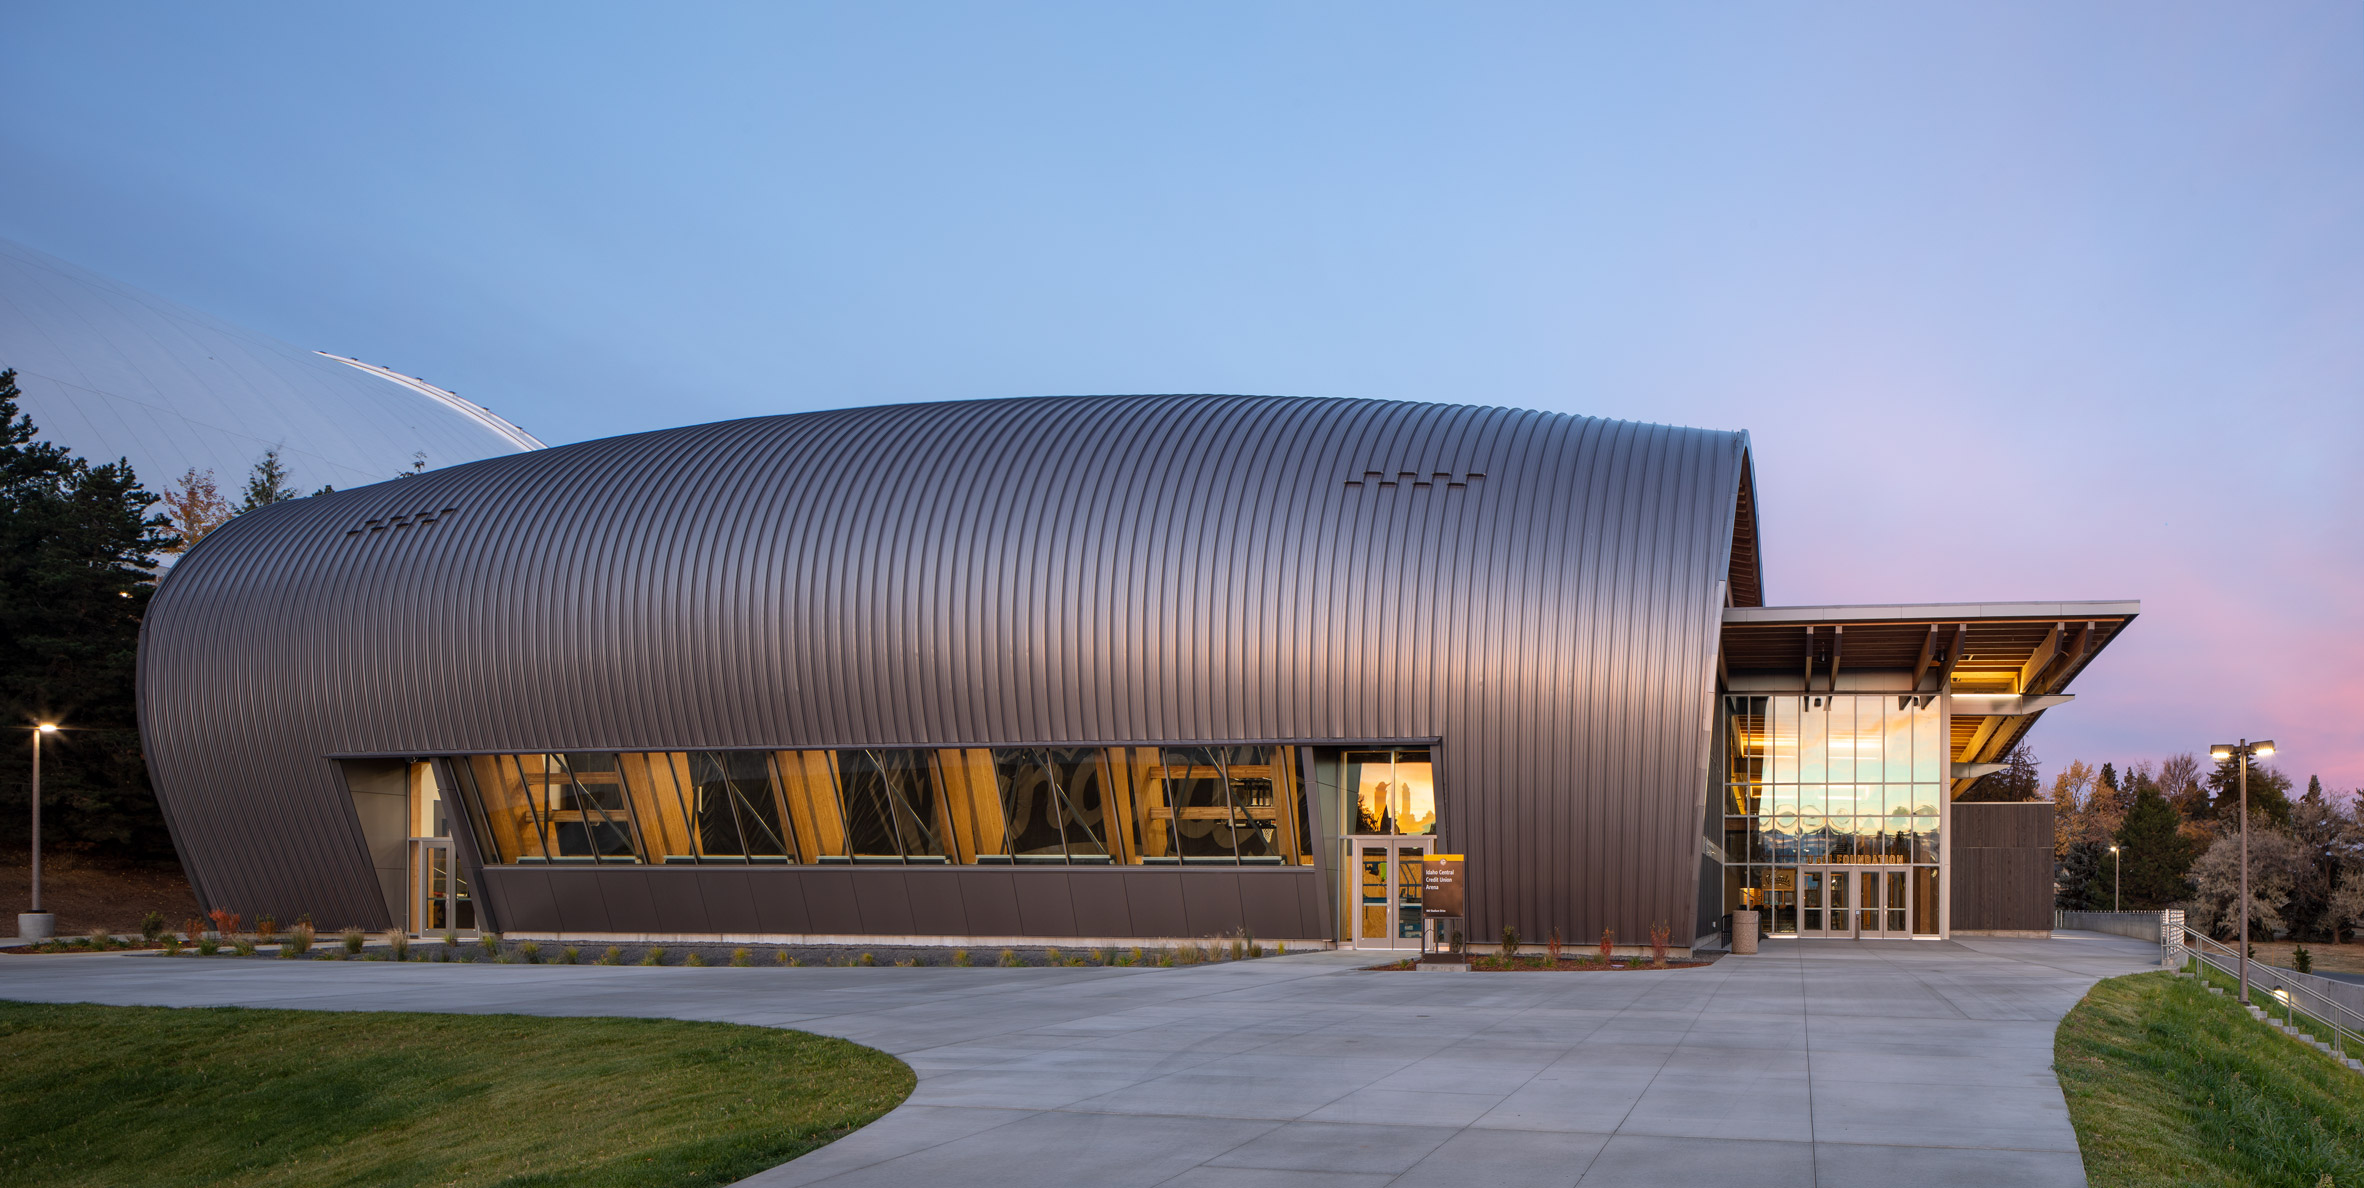 University of Idaho Central Credit Union Arena / Opsis